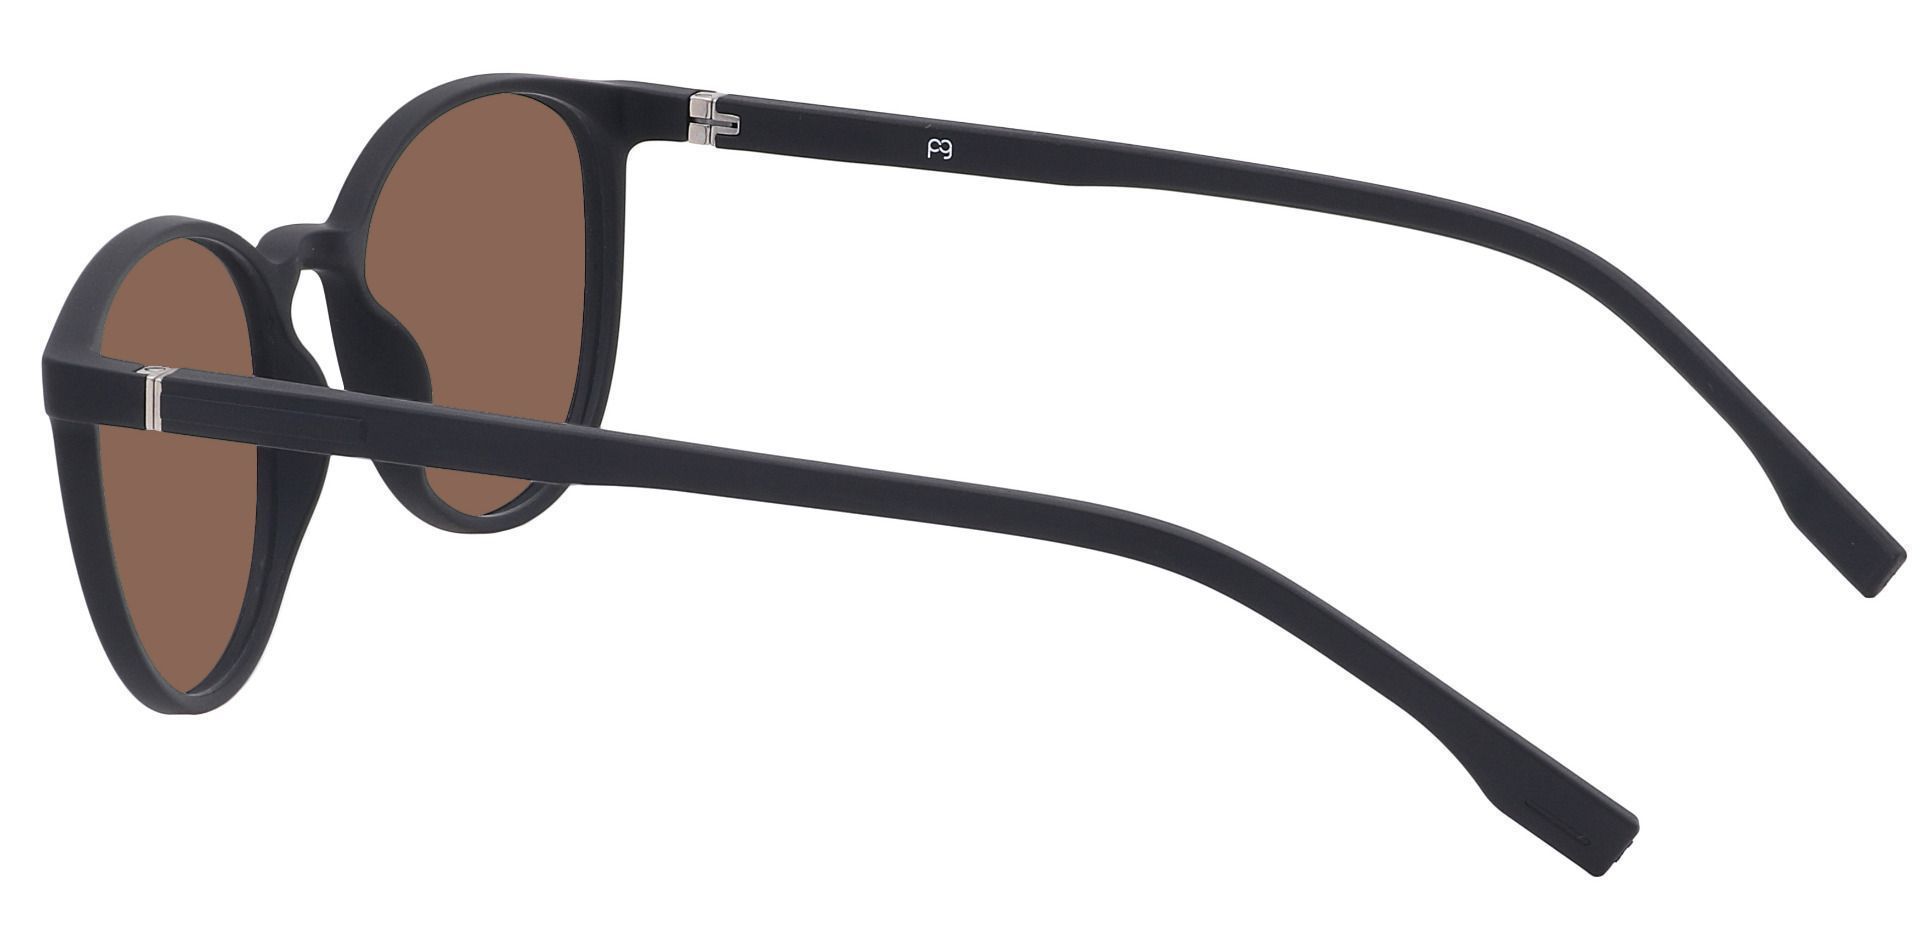 Bay Round Lined Bifocal Sunglasses - Black Frame With Brown Lenses